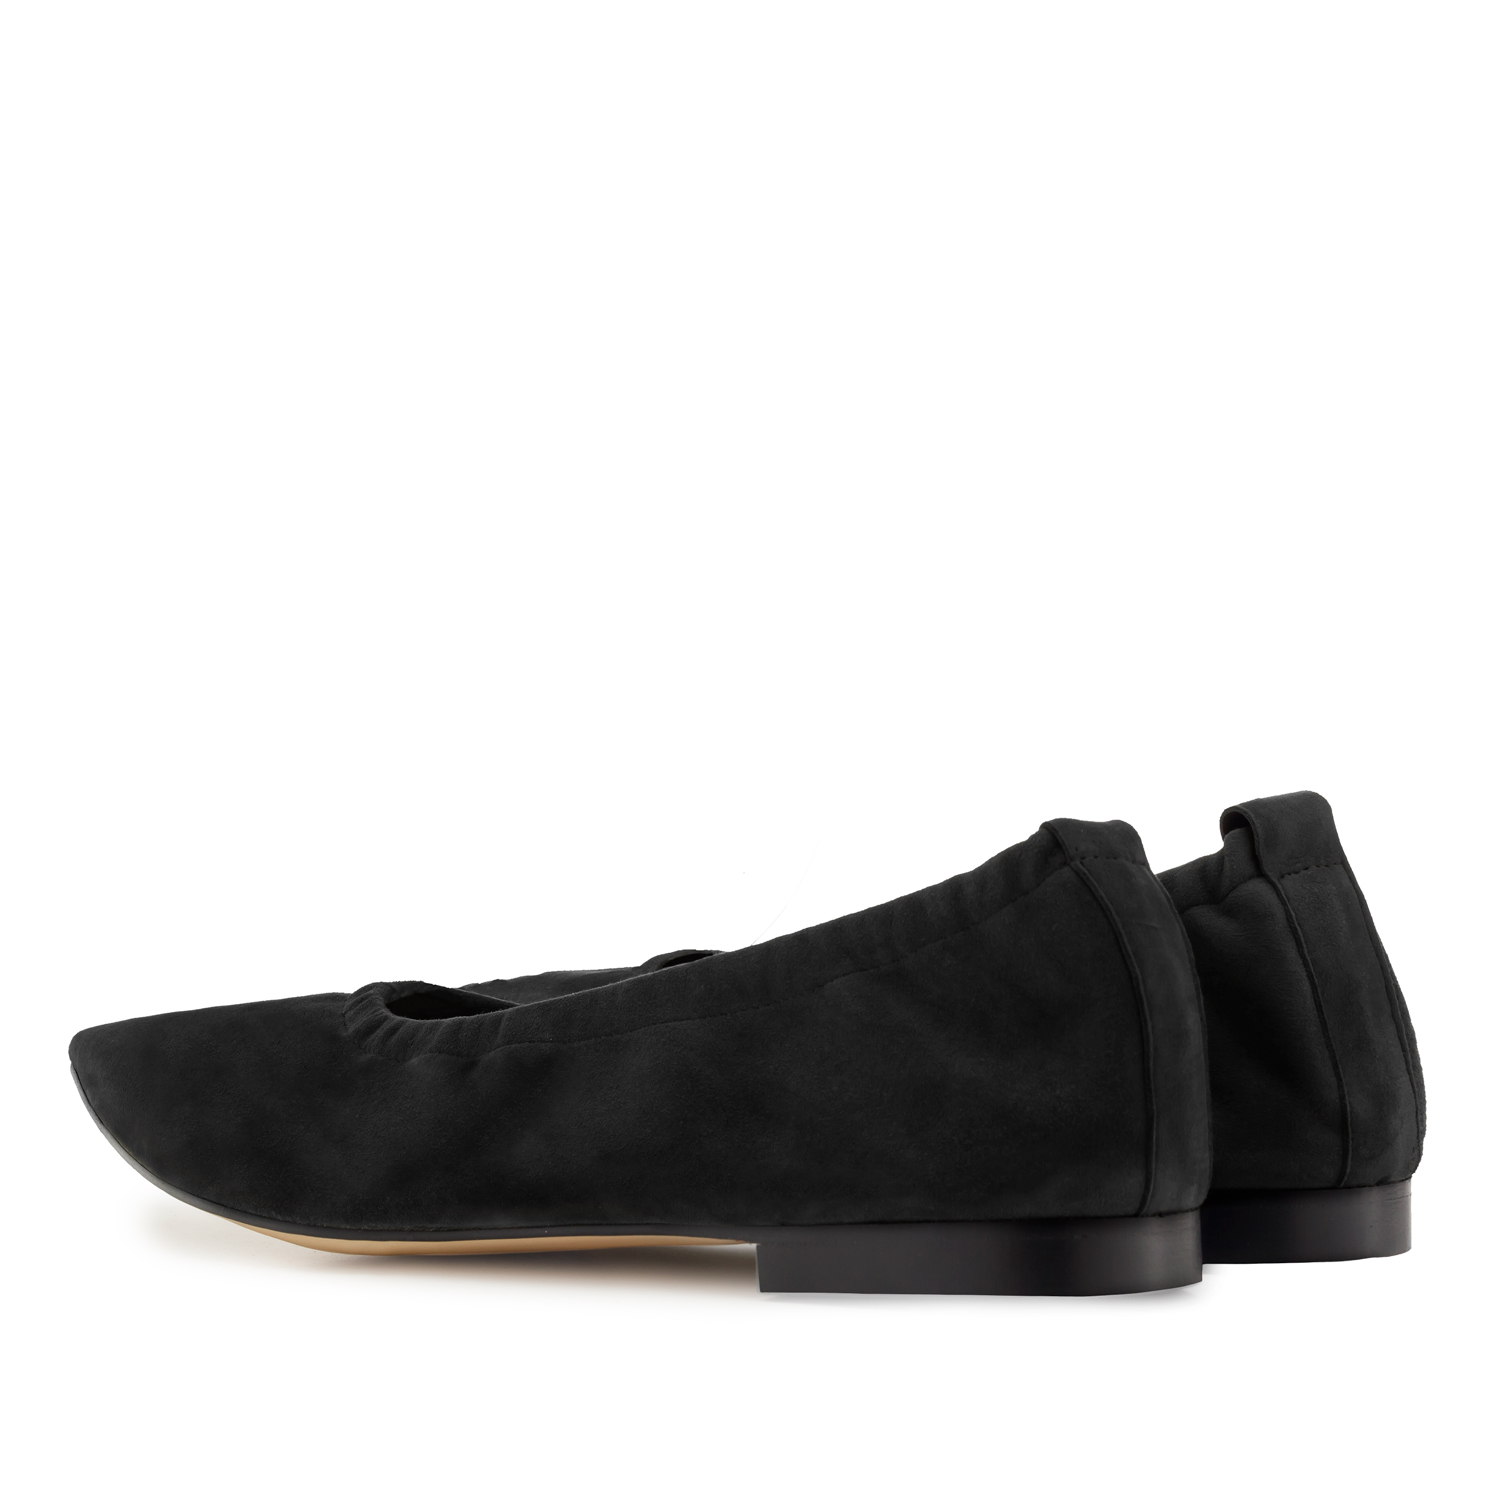 Elasticated Ballet Flats in Black Suede Leather 